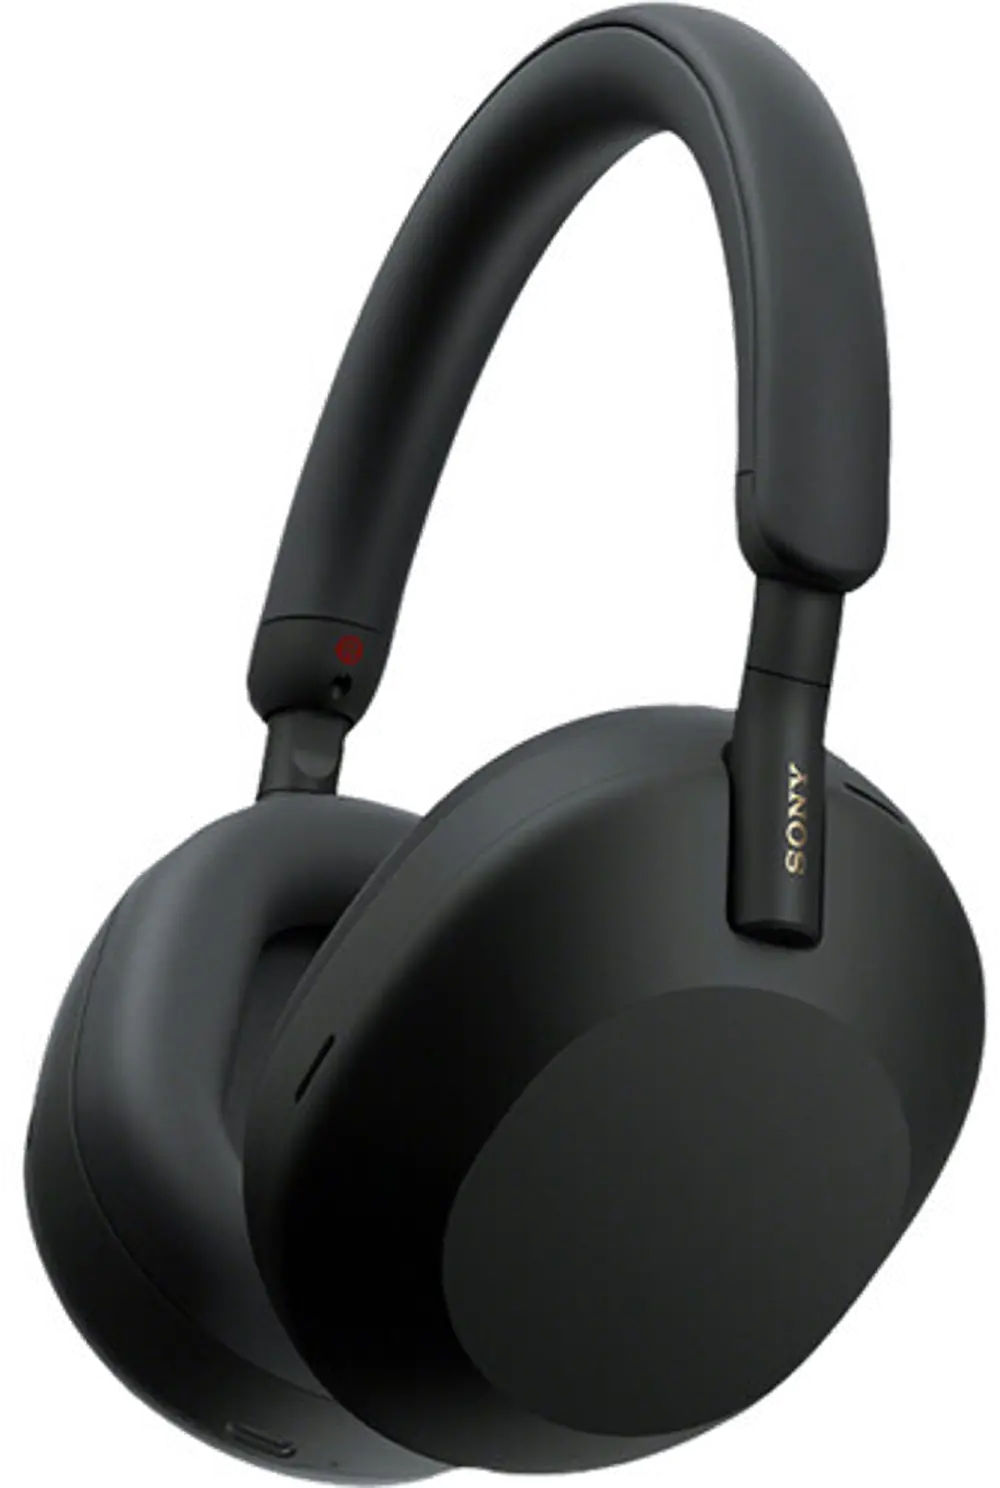 WH1000XM5/B Sony WH-1000XM5 Noise-Canceling Wireless Over-Ear Headphones - Black-1